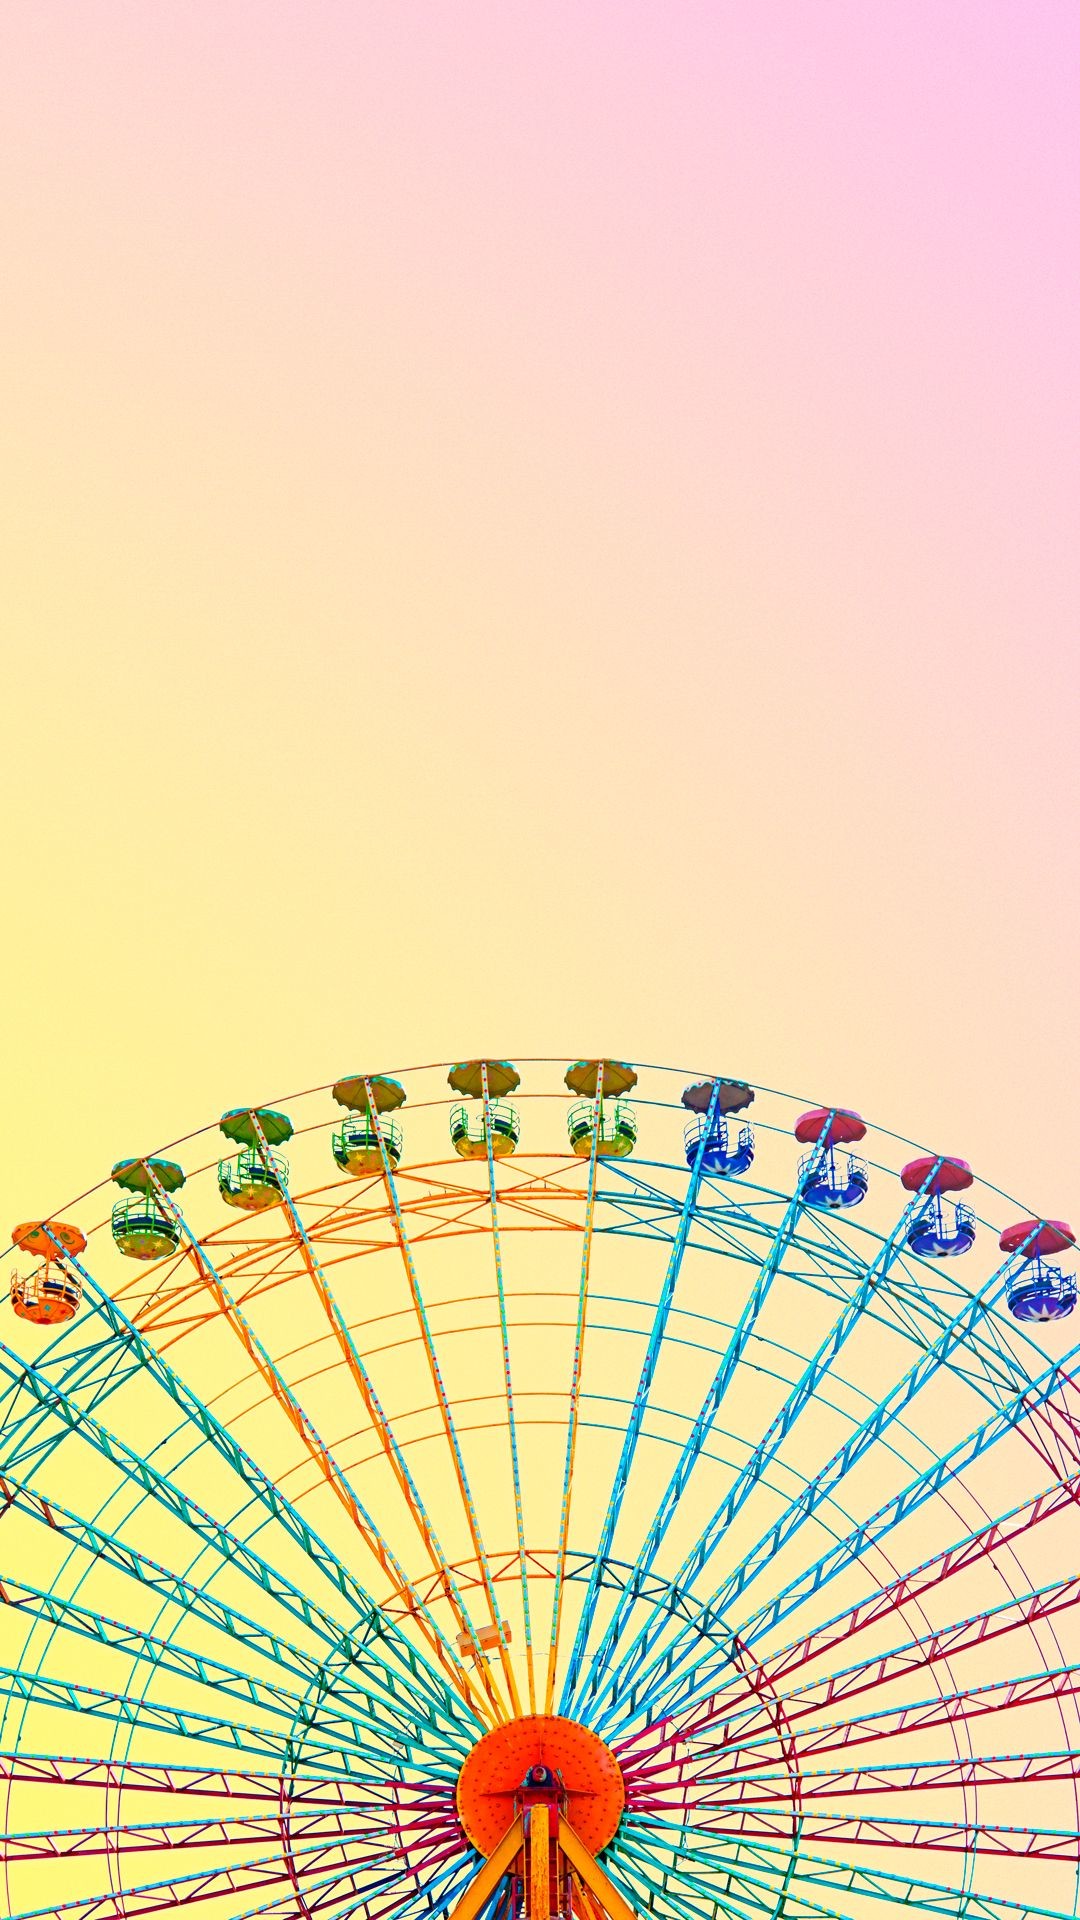 1080x1920, Wallpapers For Your Phone Minimalist Iphone - Ferris Wheel Wallpaper Iphone - HD Wallpaper 